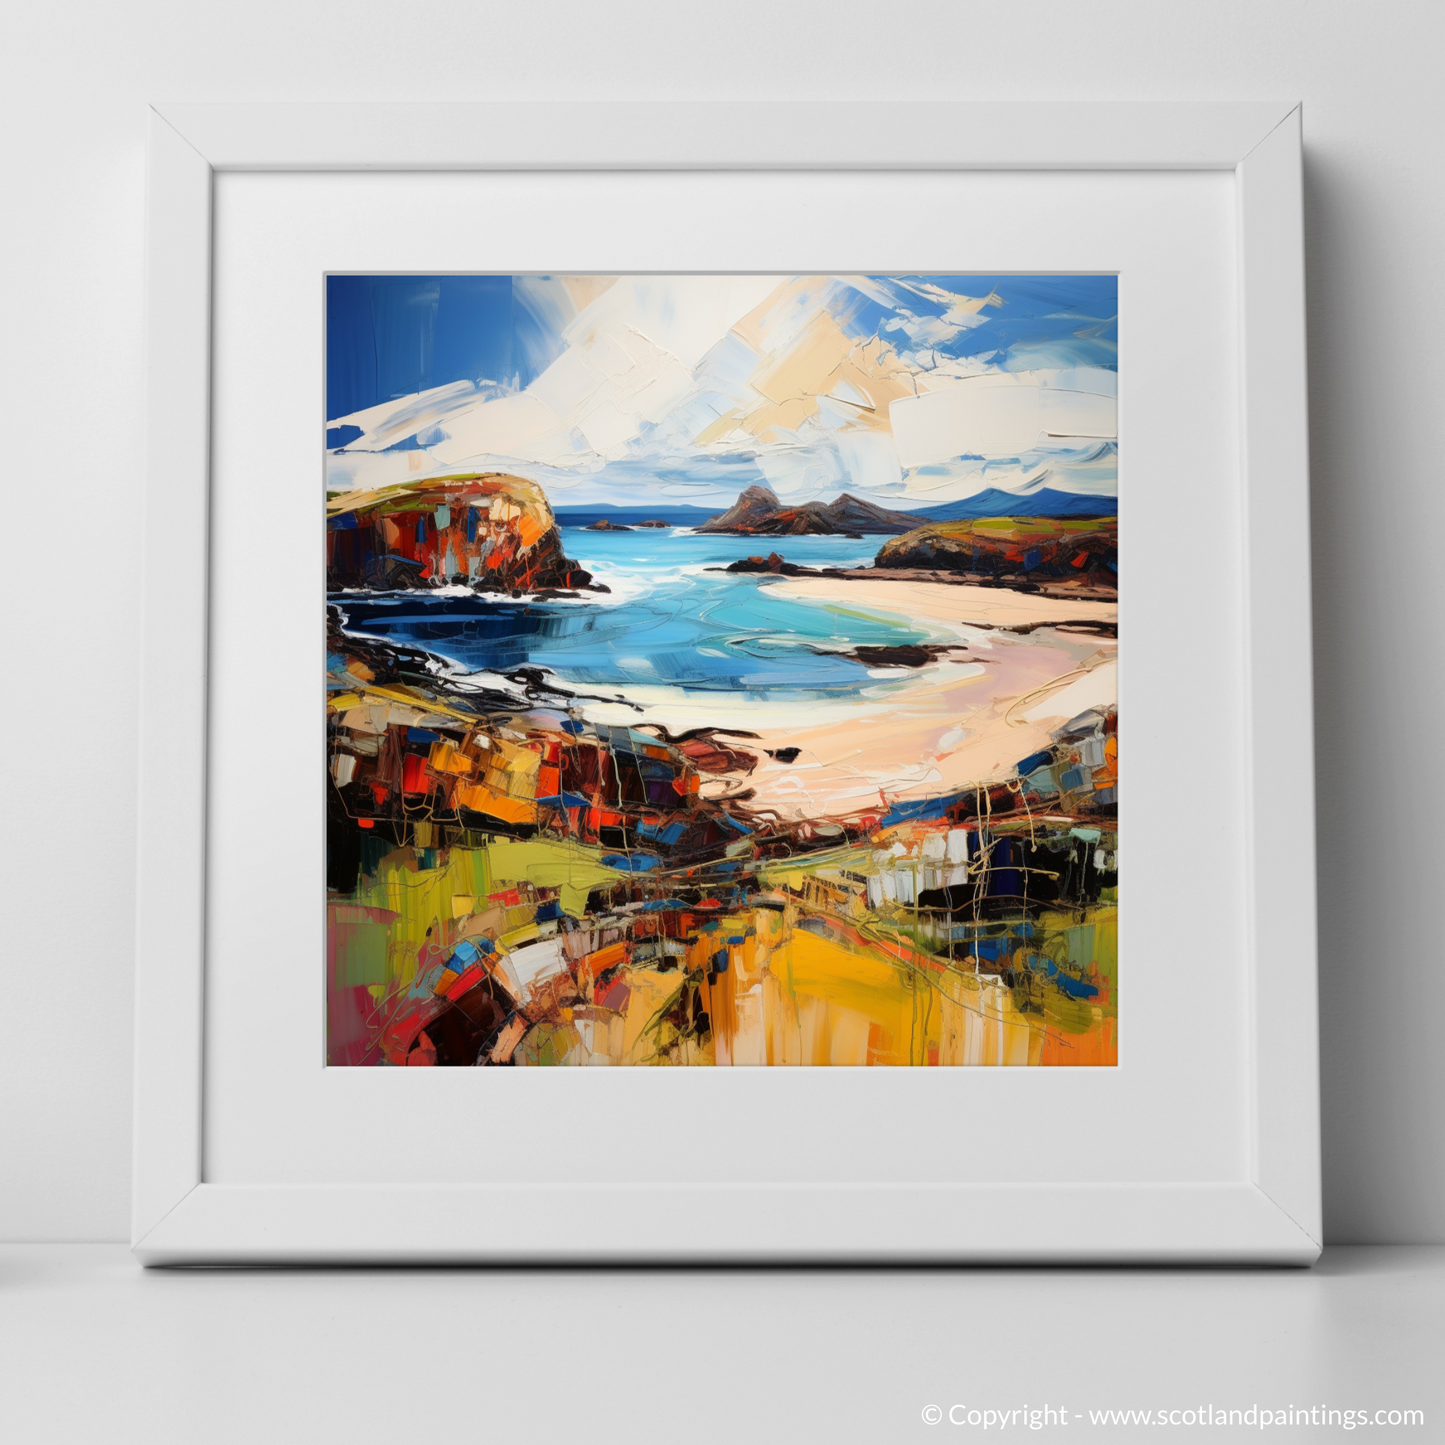 Art Print of Scourie Bay, Sutherland with a white frame